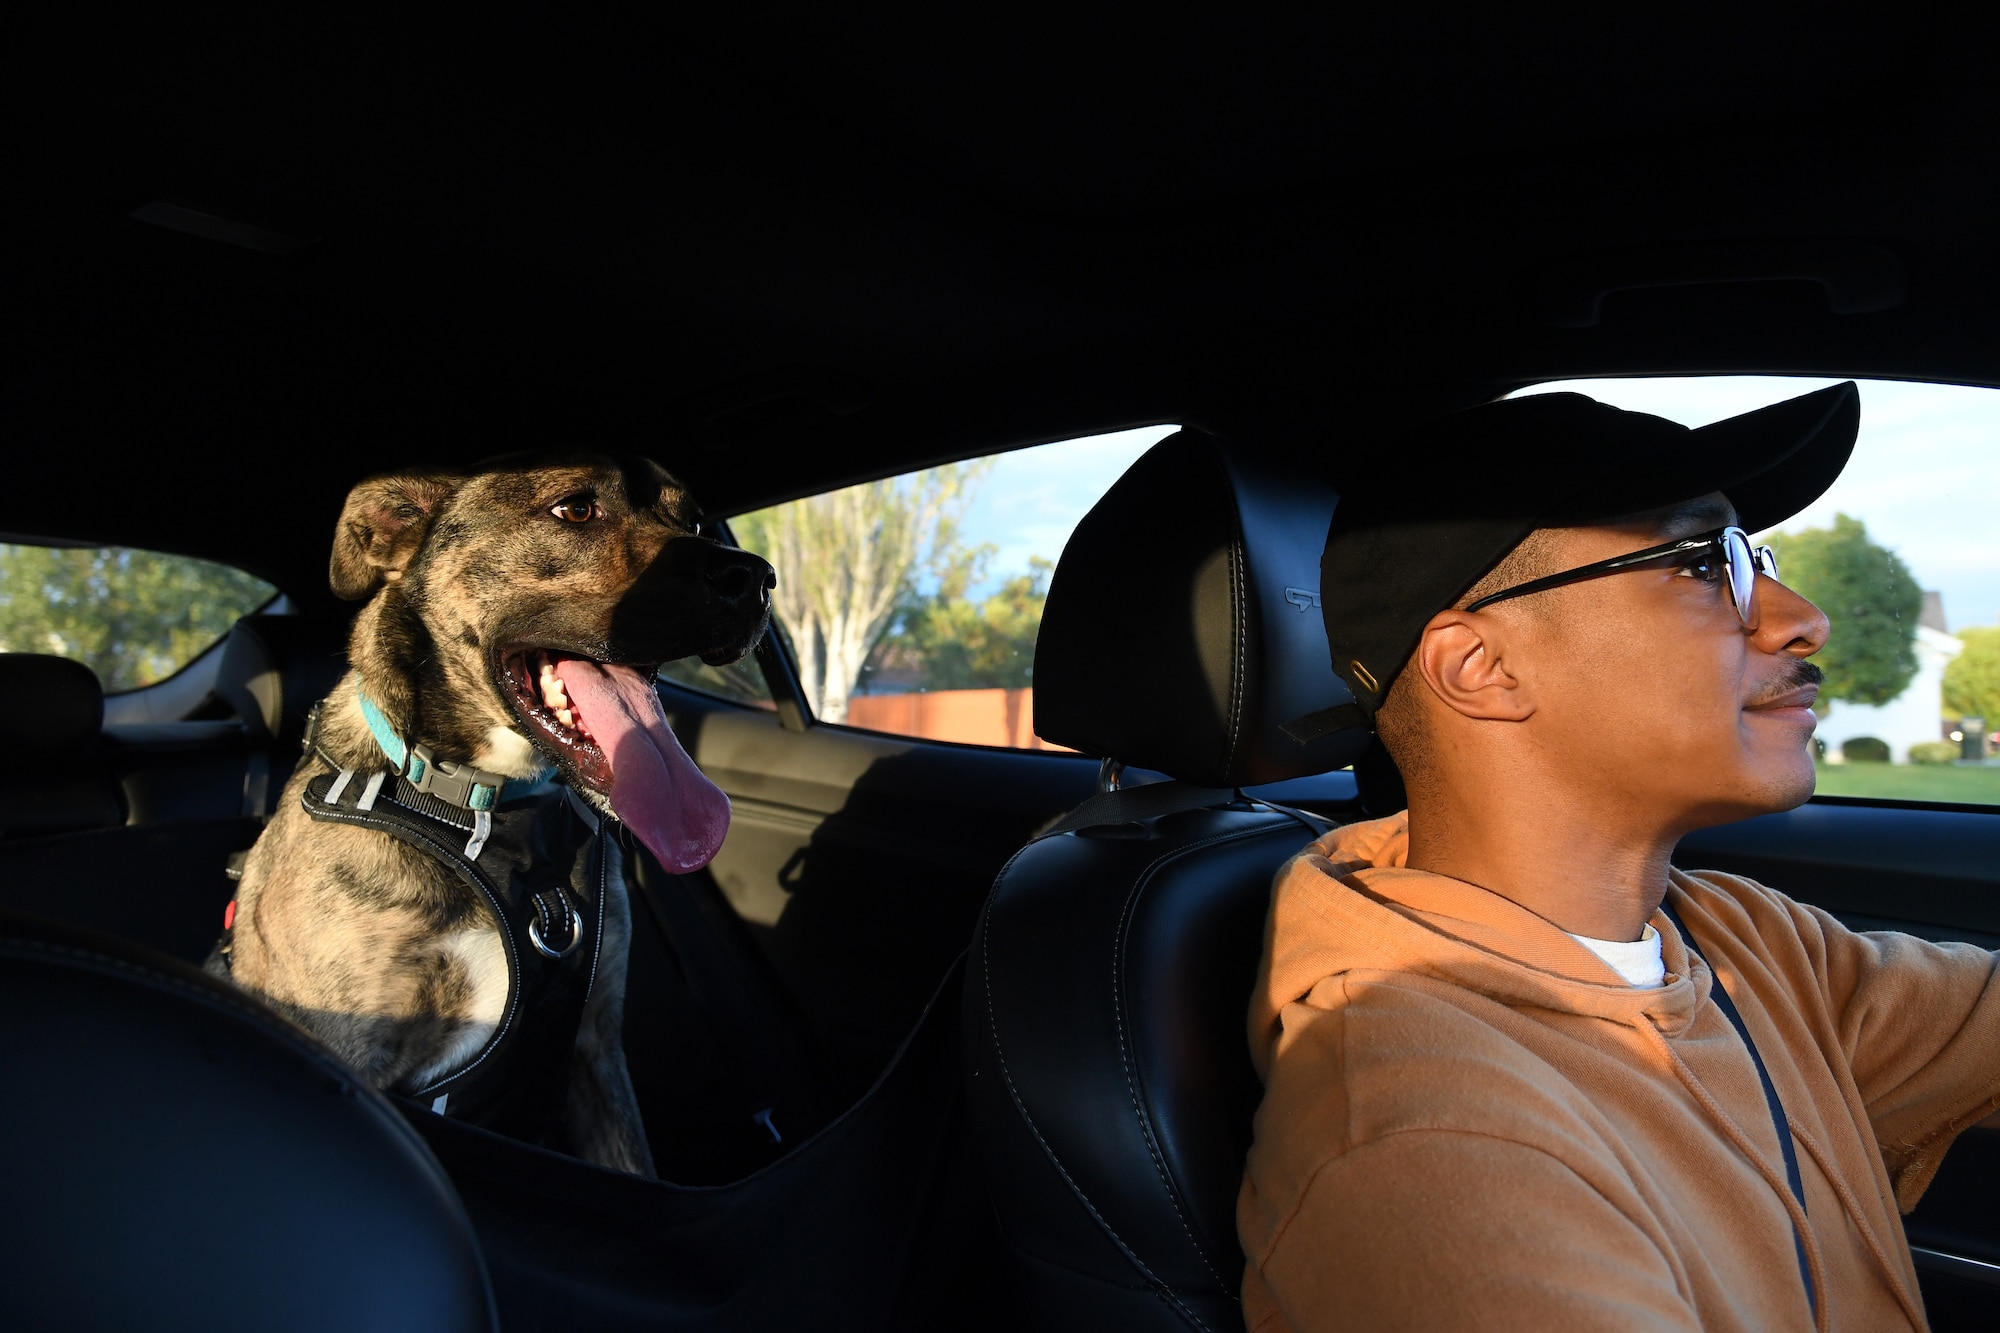 Senior Airman Elijaih Tiggs, 319th Reconnaissance Wing photojournalist journeyman, and his dog Memphis, a 2-year-old Australian Cattle Dog mix, drive to the base dog park for “Tactical Paws,” a resilience event, Sept. 18, 2019, on Grand Forks Air Force Base, North Dakota. Tiggs and Memphis joined other base members and furry friends for the event, which mirrored recent mandatory resilience tactical pauses around the U.S. Air Force. Tactical Paws brought the Grand Forks AFB community together to socialize, but more importantly to share information regarding local tips and options for pet healthcare and boarding in case of deployment. (U.S. Air Force photo by Senior Airman Elora J. Martinez)